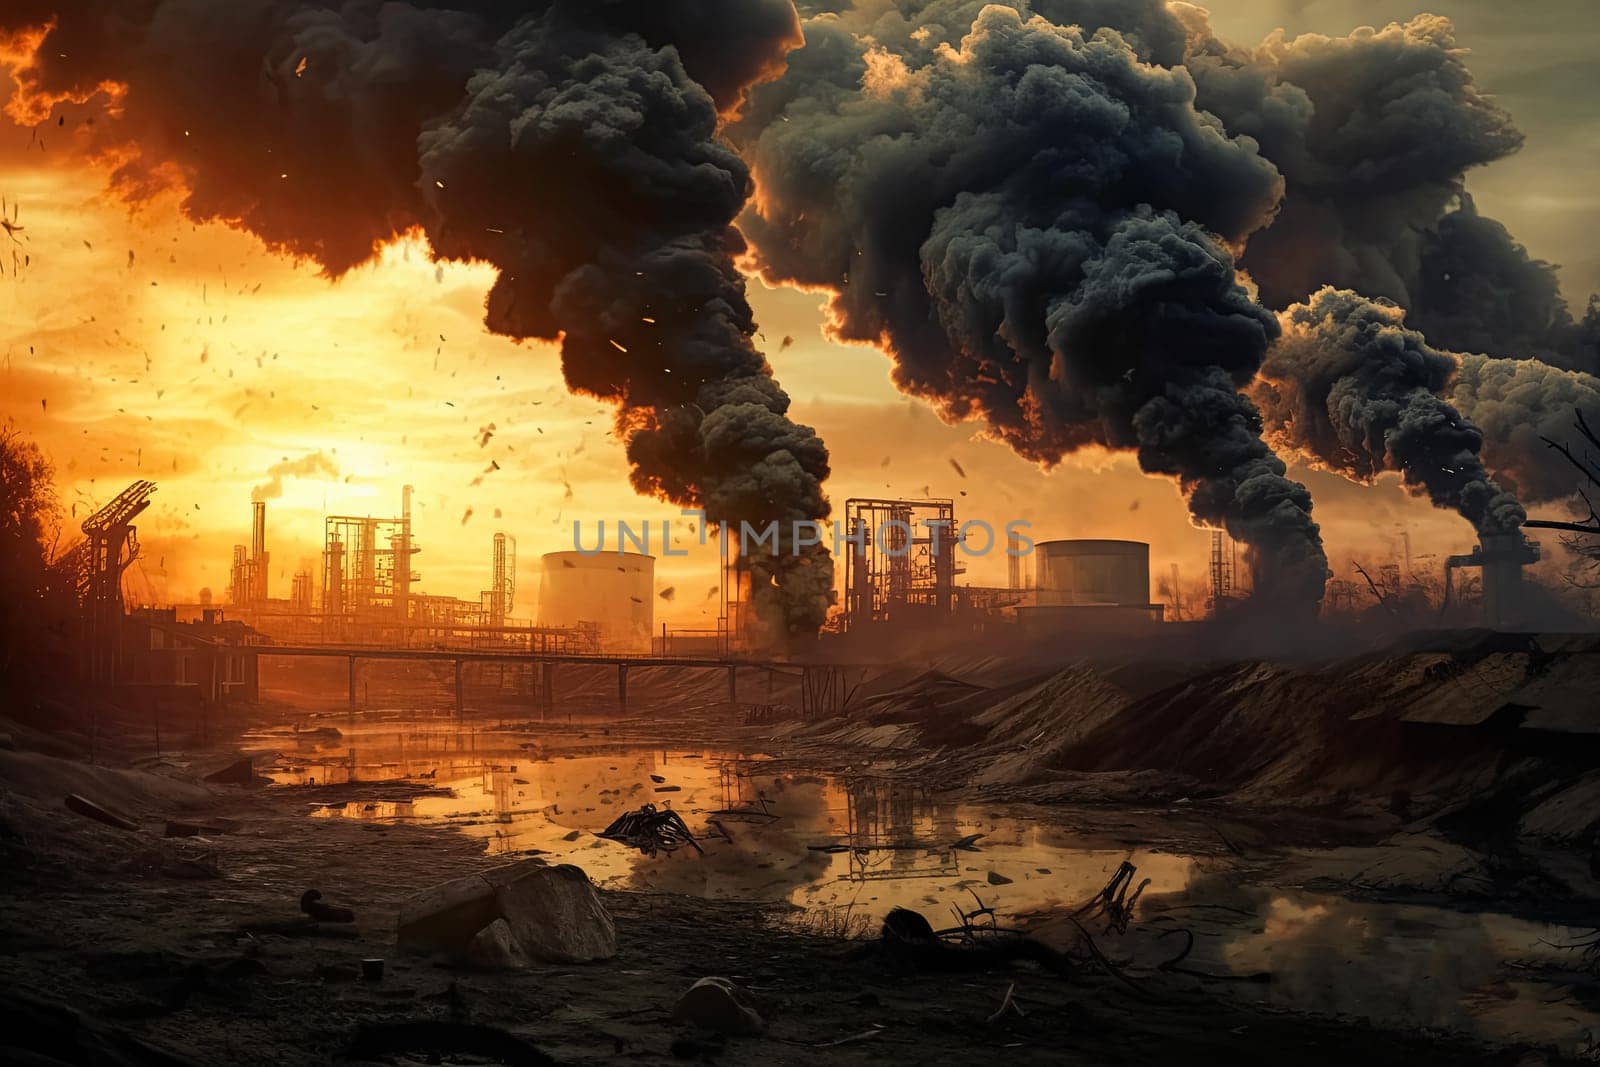 A large industrial plant is spewing smoke into the air. The sky is dark and the water is murky. The scene is bleak and foreboding